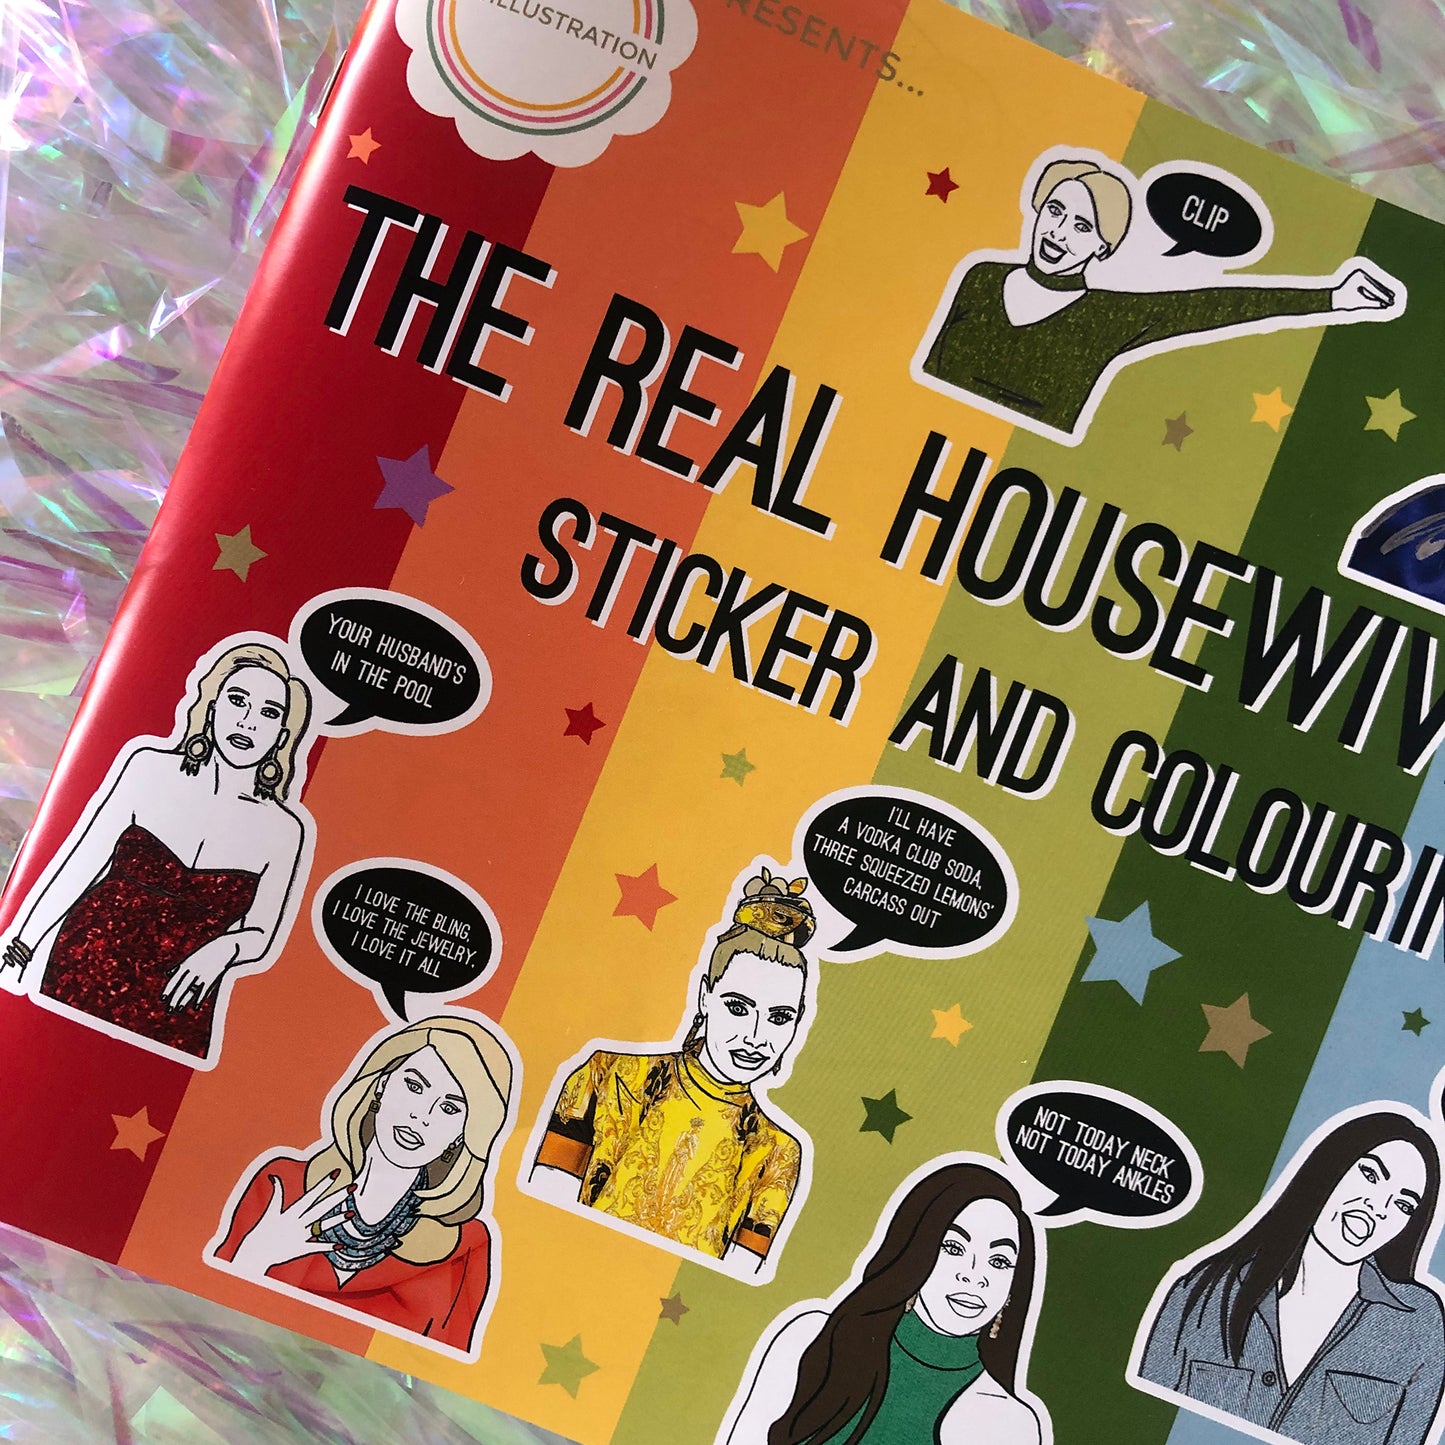 Image shows a sticker and colouring book inspired by The Real Housewives